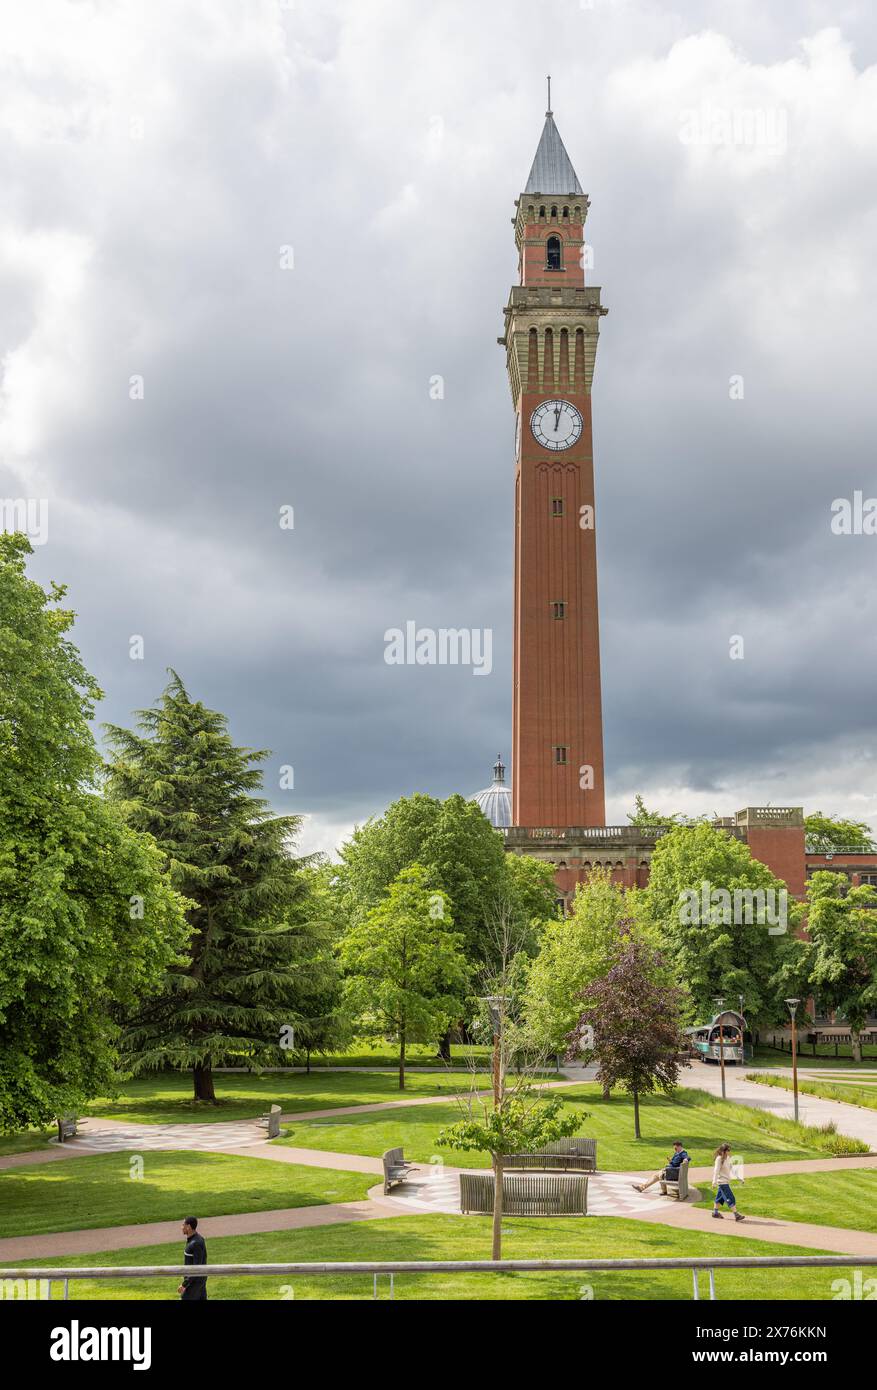 Old Joe at the University of Birmingham is the tallest freestanding clocktower in the world. University of Birmingham campus, concept student life. Stock Photo